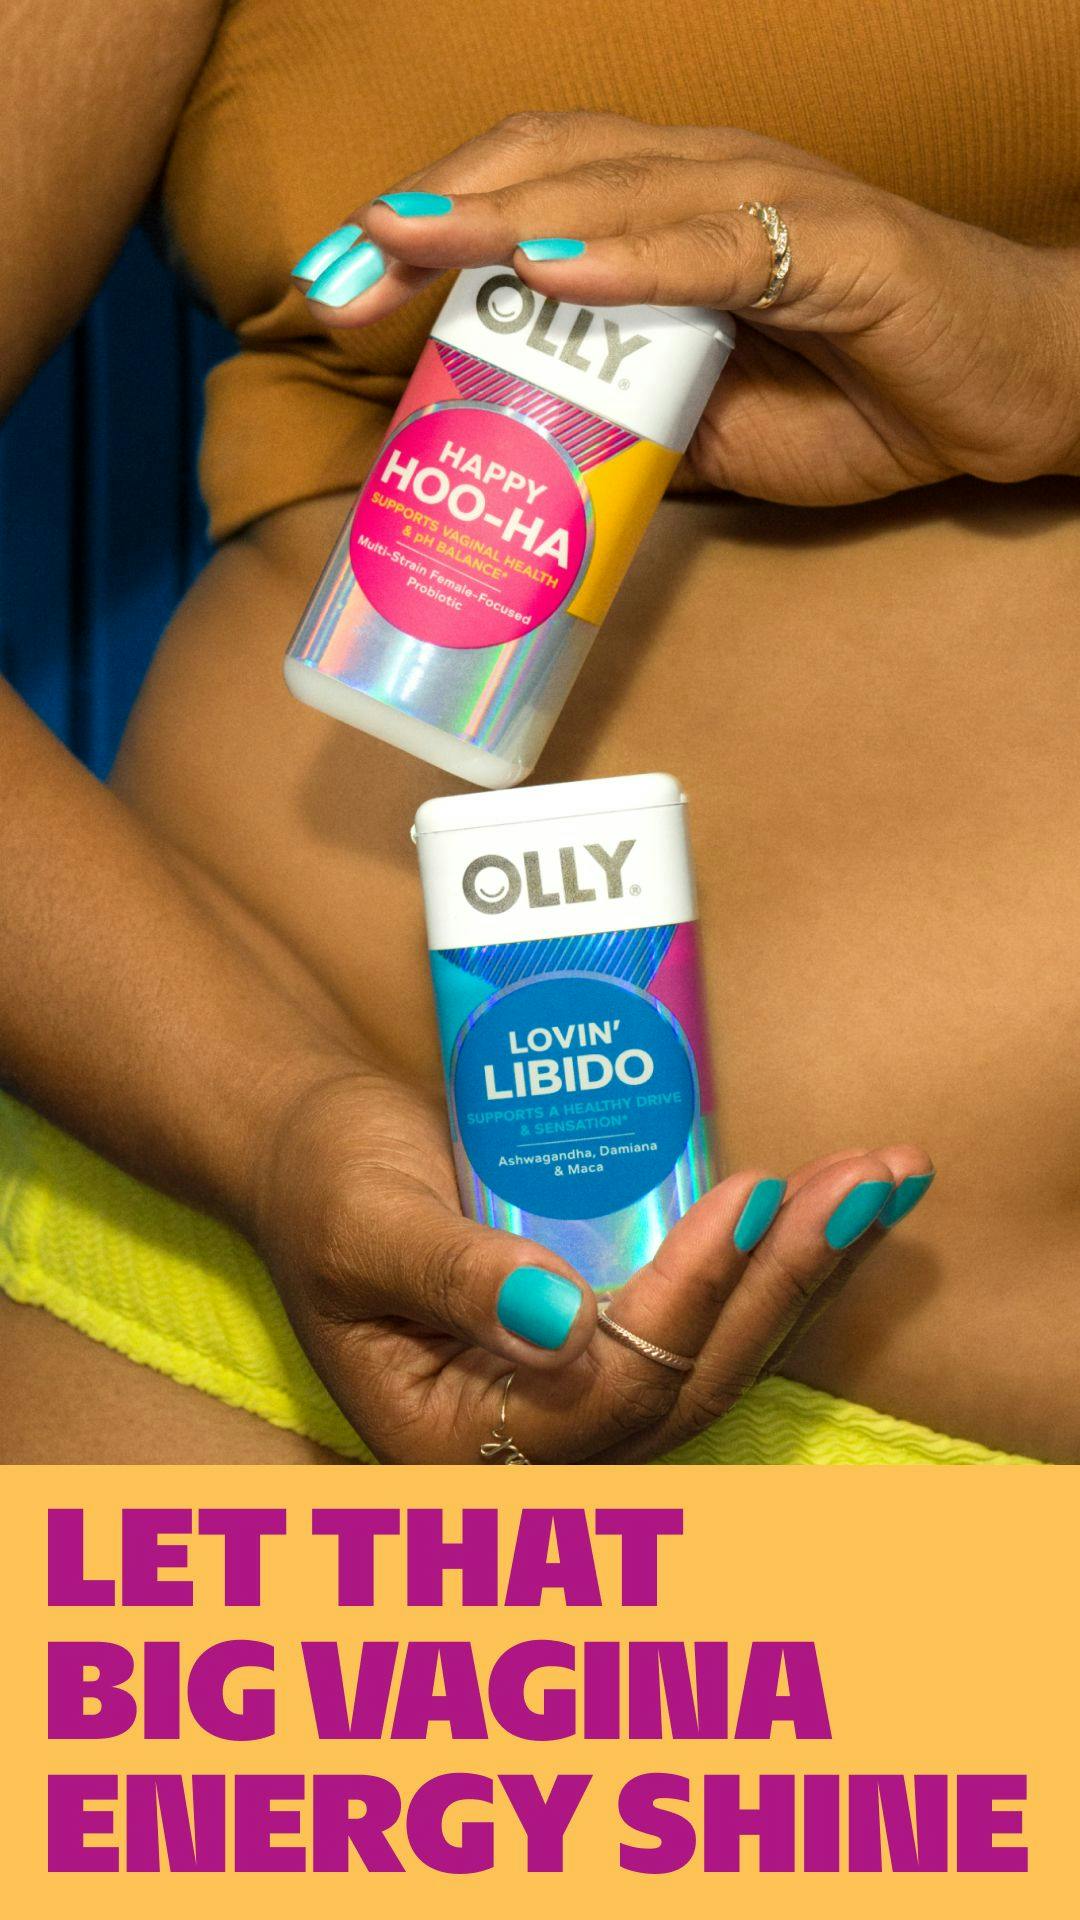 Sex health for her: OLLY’s empowering marketing featuring products from its Women’s Wellness line. Photo from OLLY.